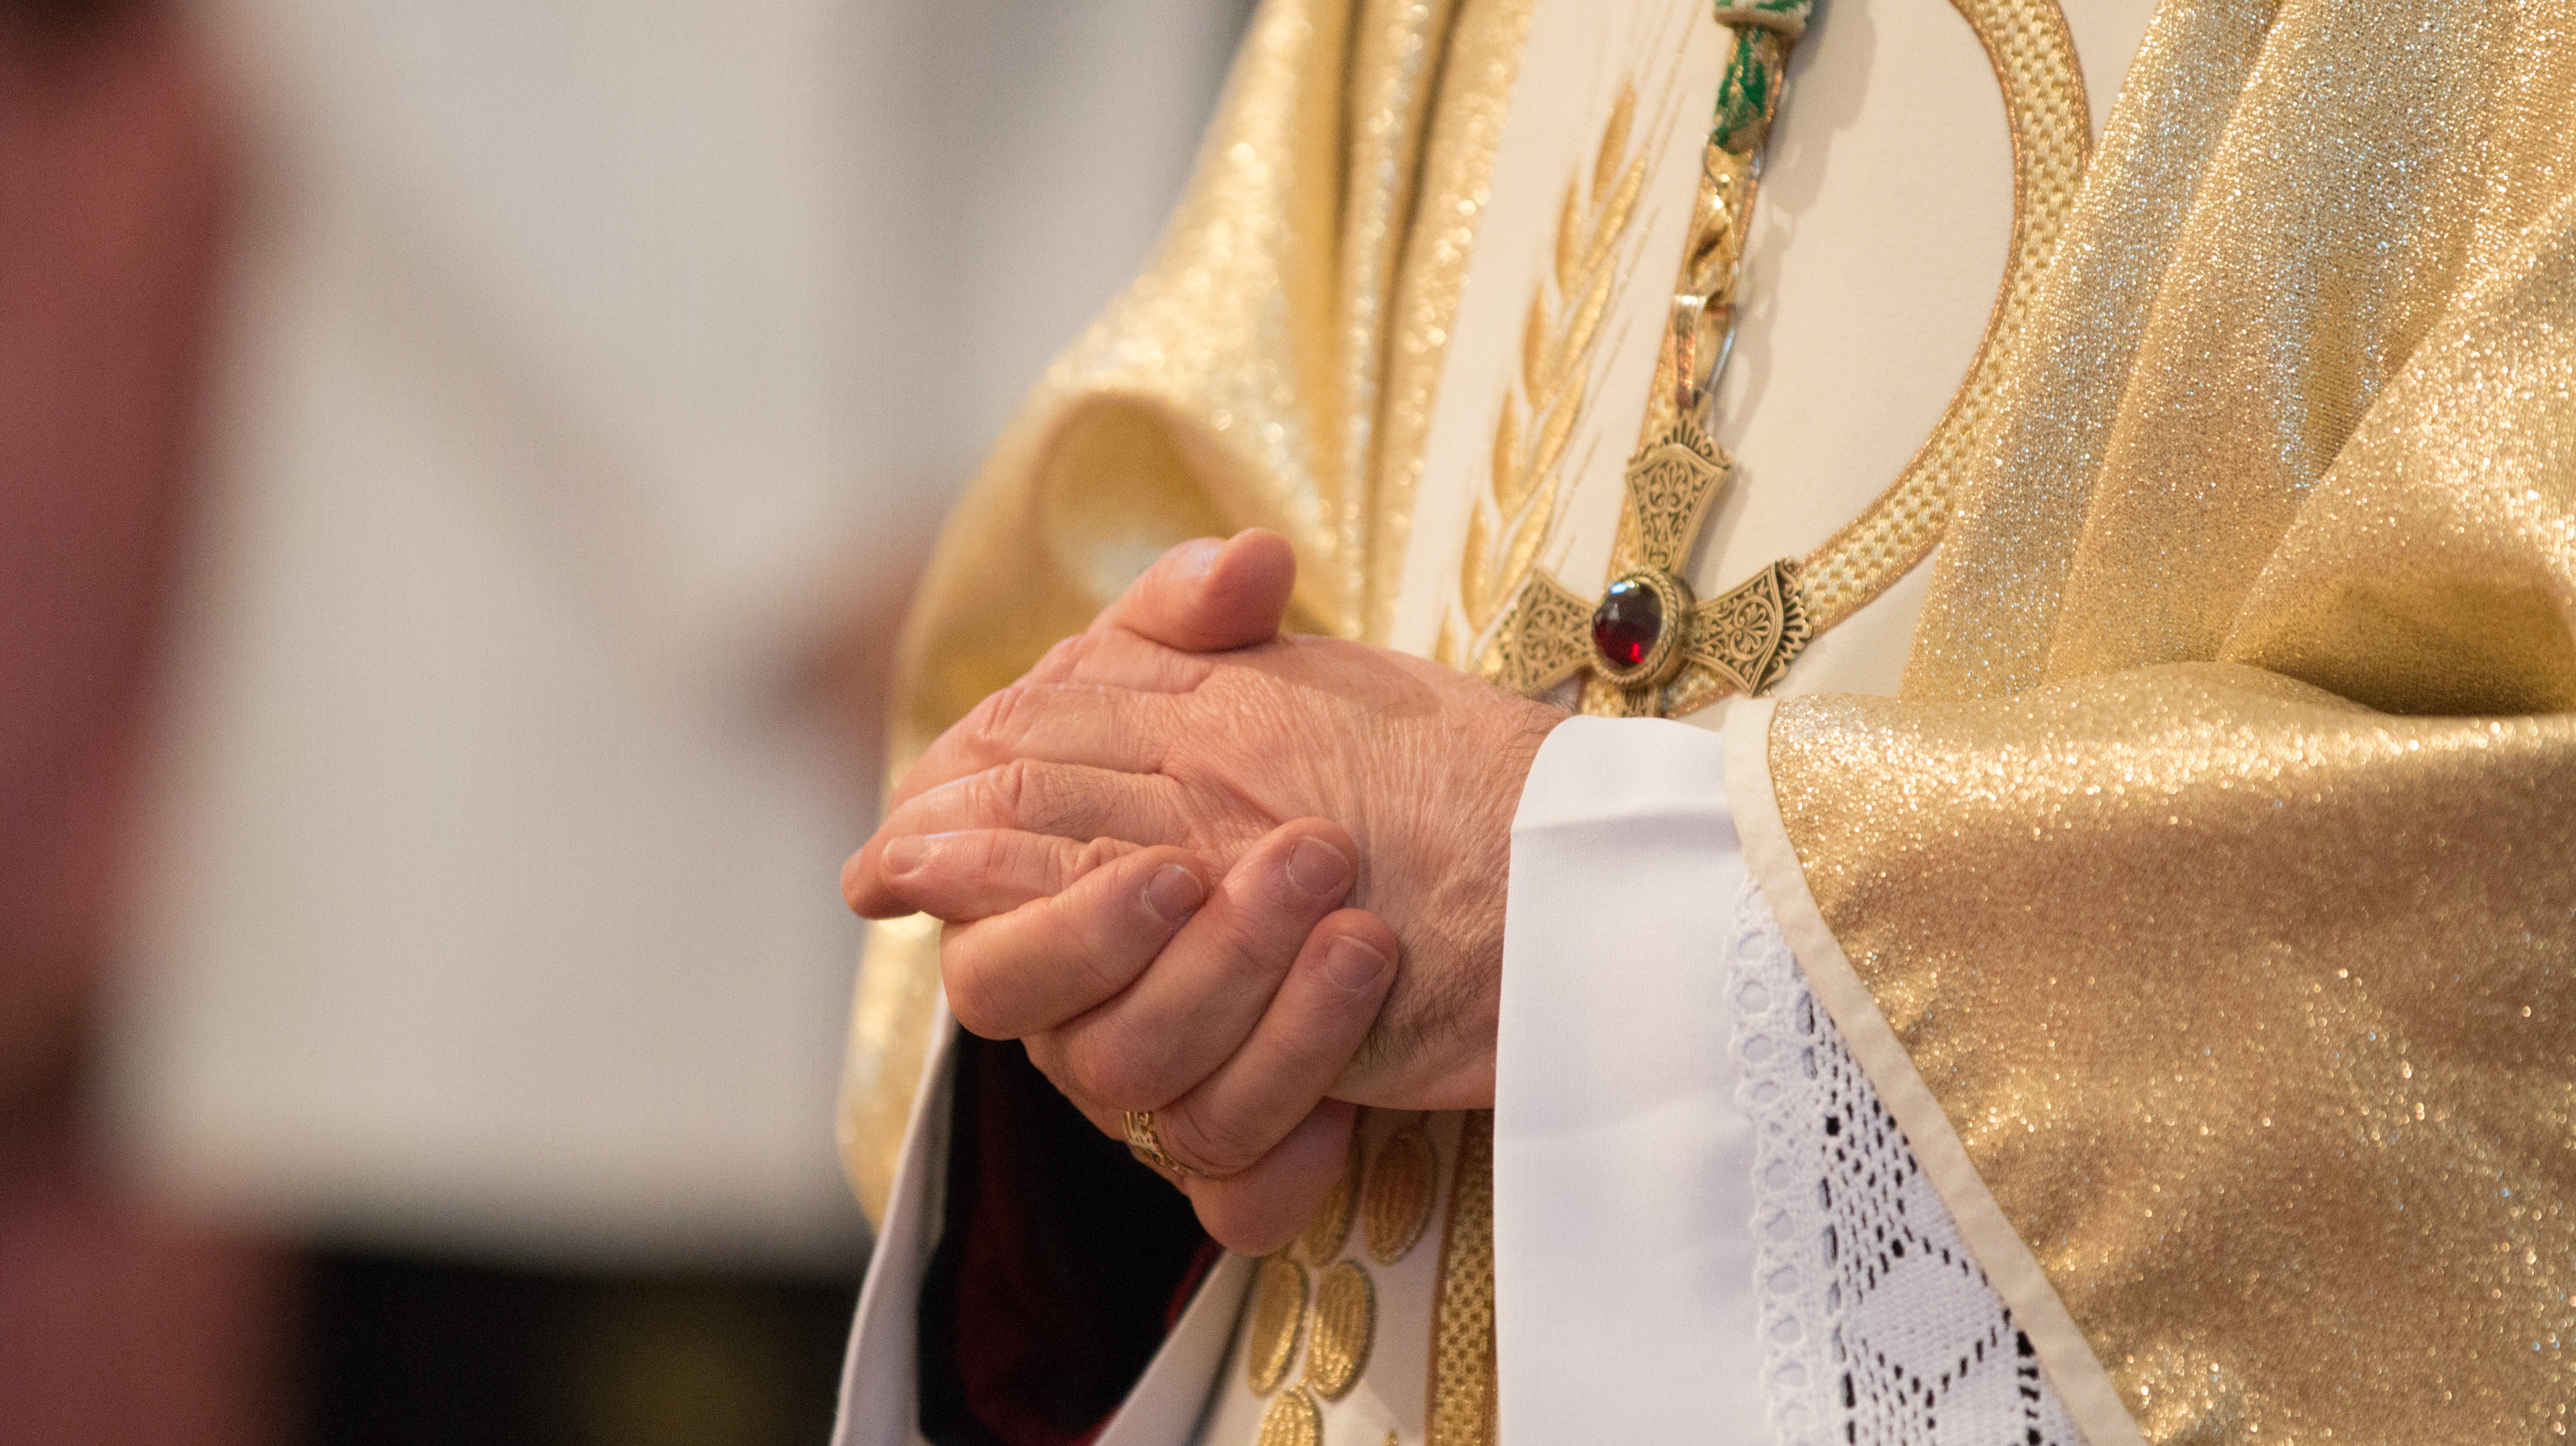 There’s Now A U.S. Database Of Priests Credibly Accused Of Abuse